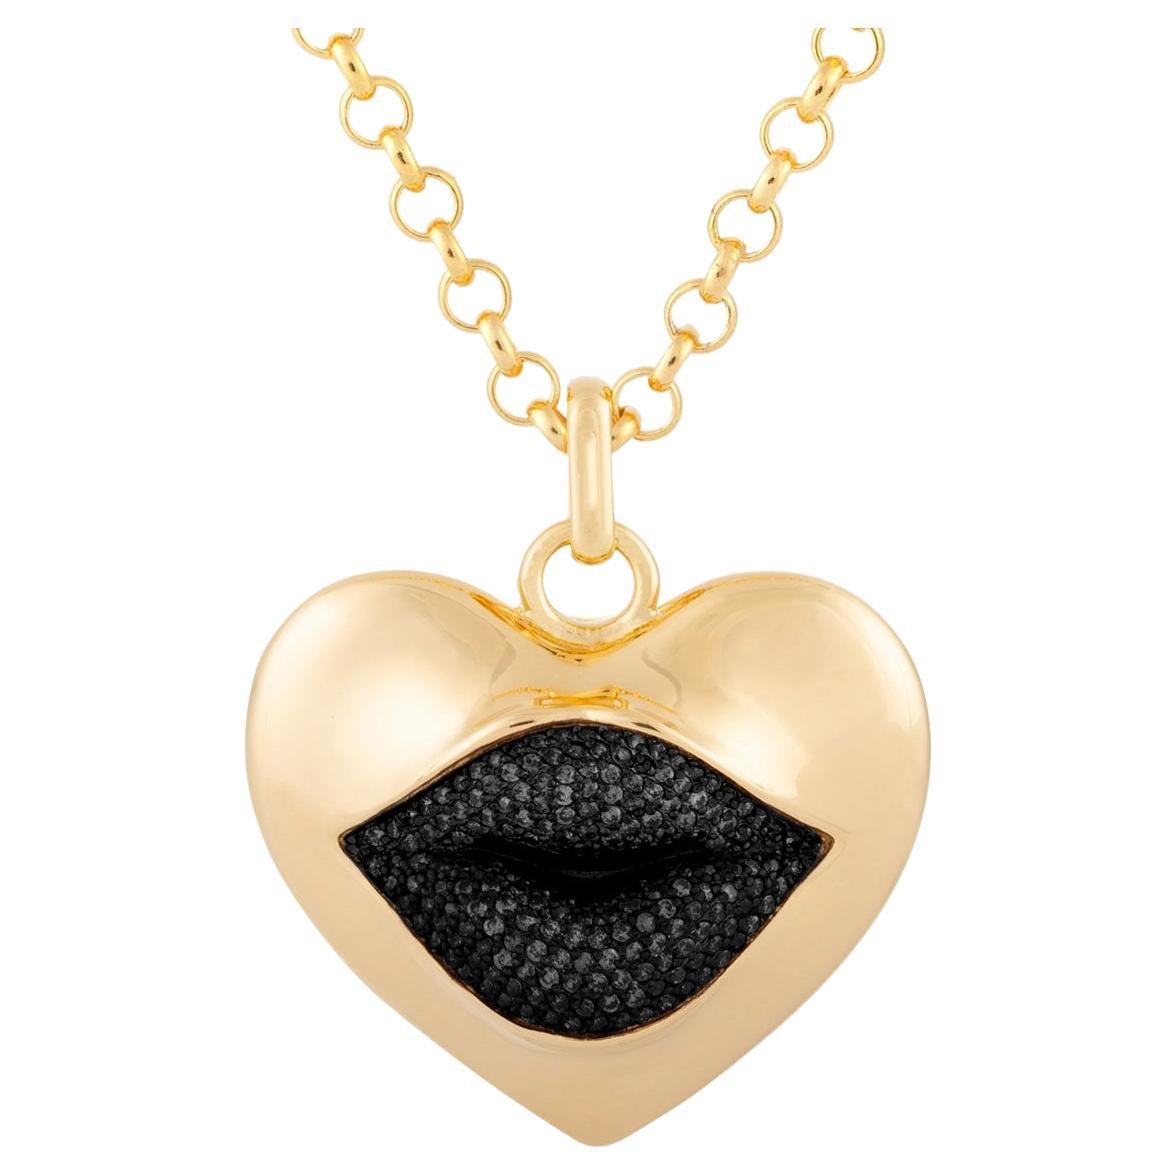 Naimah Love Lips Statement Necklace, Black For Sale